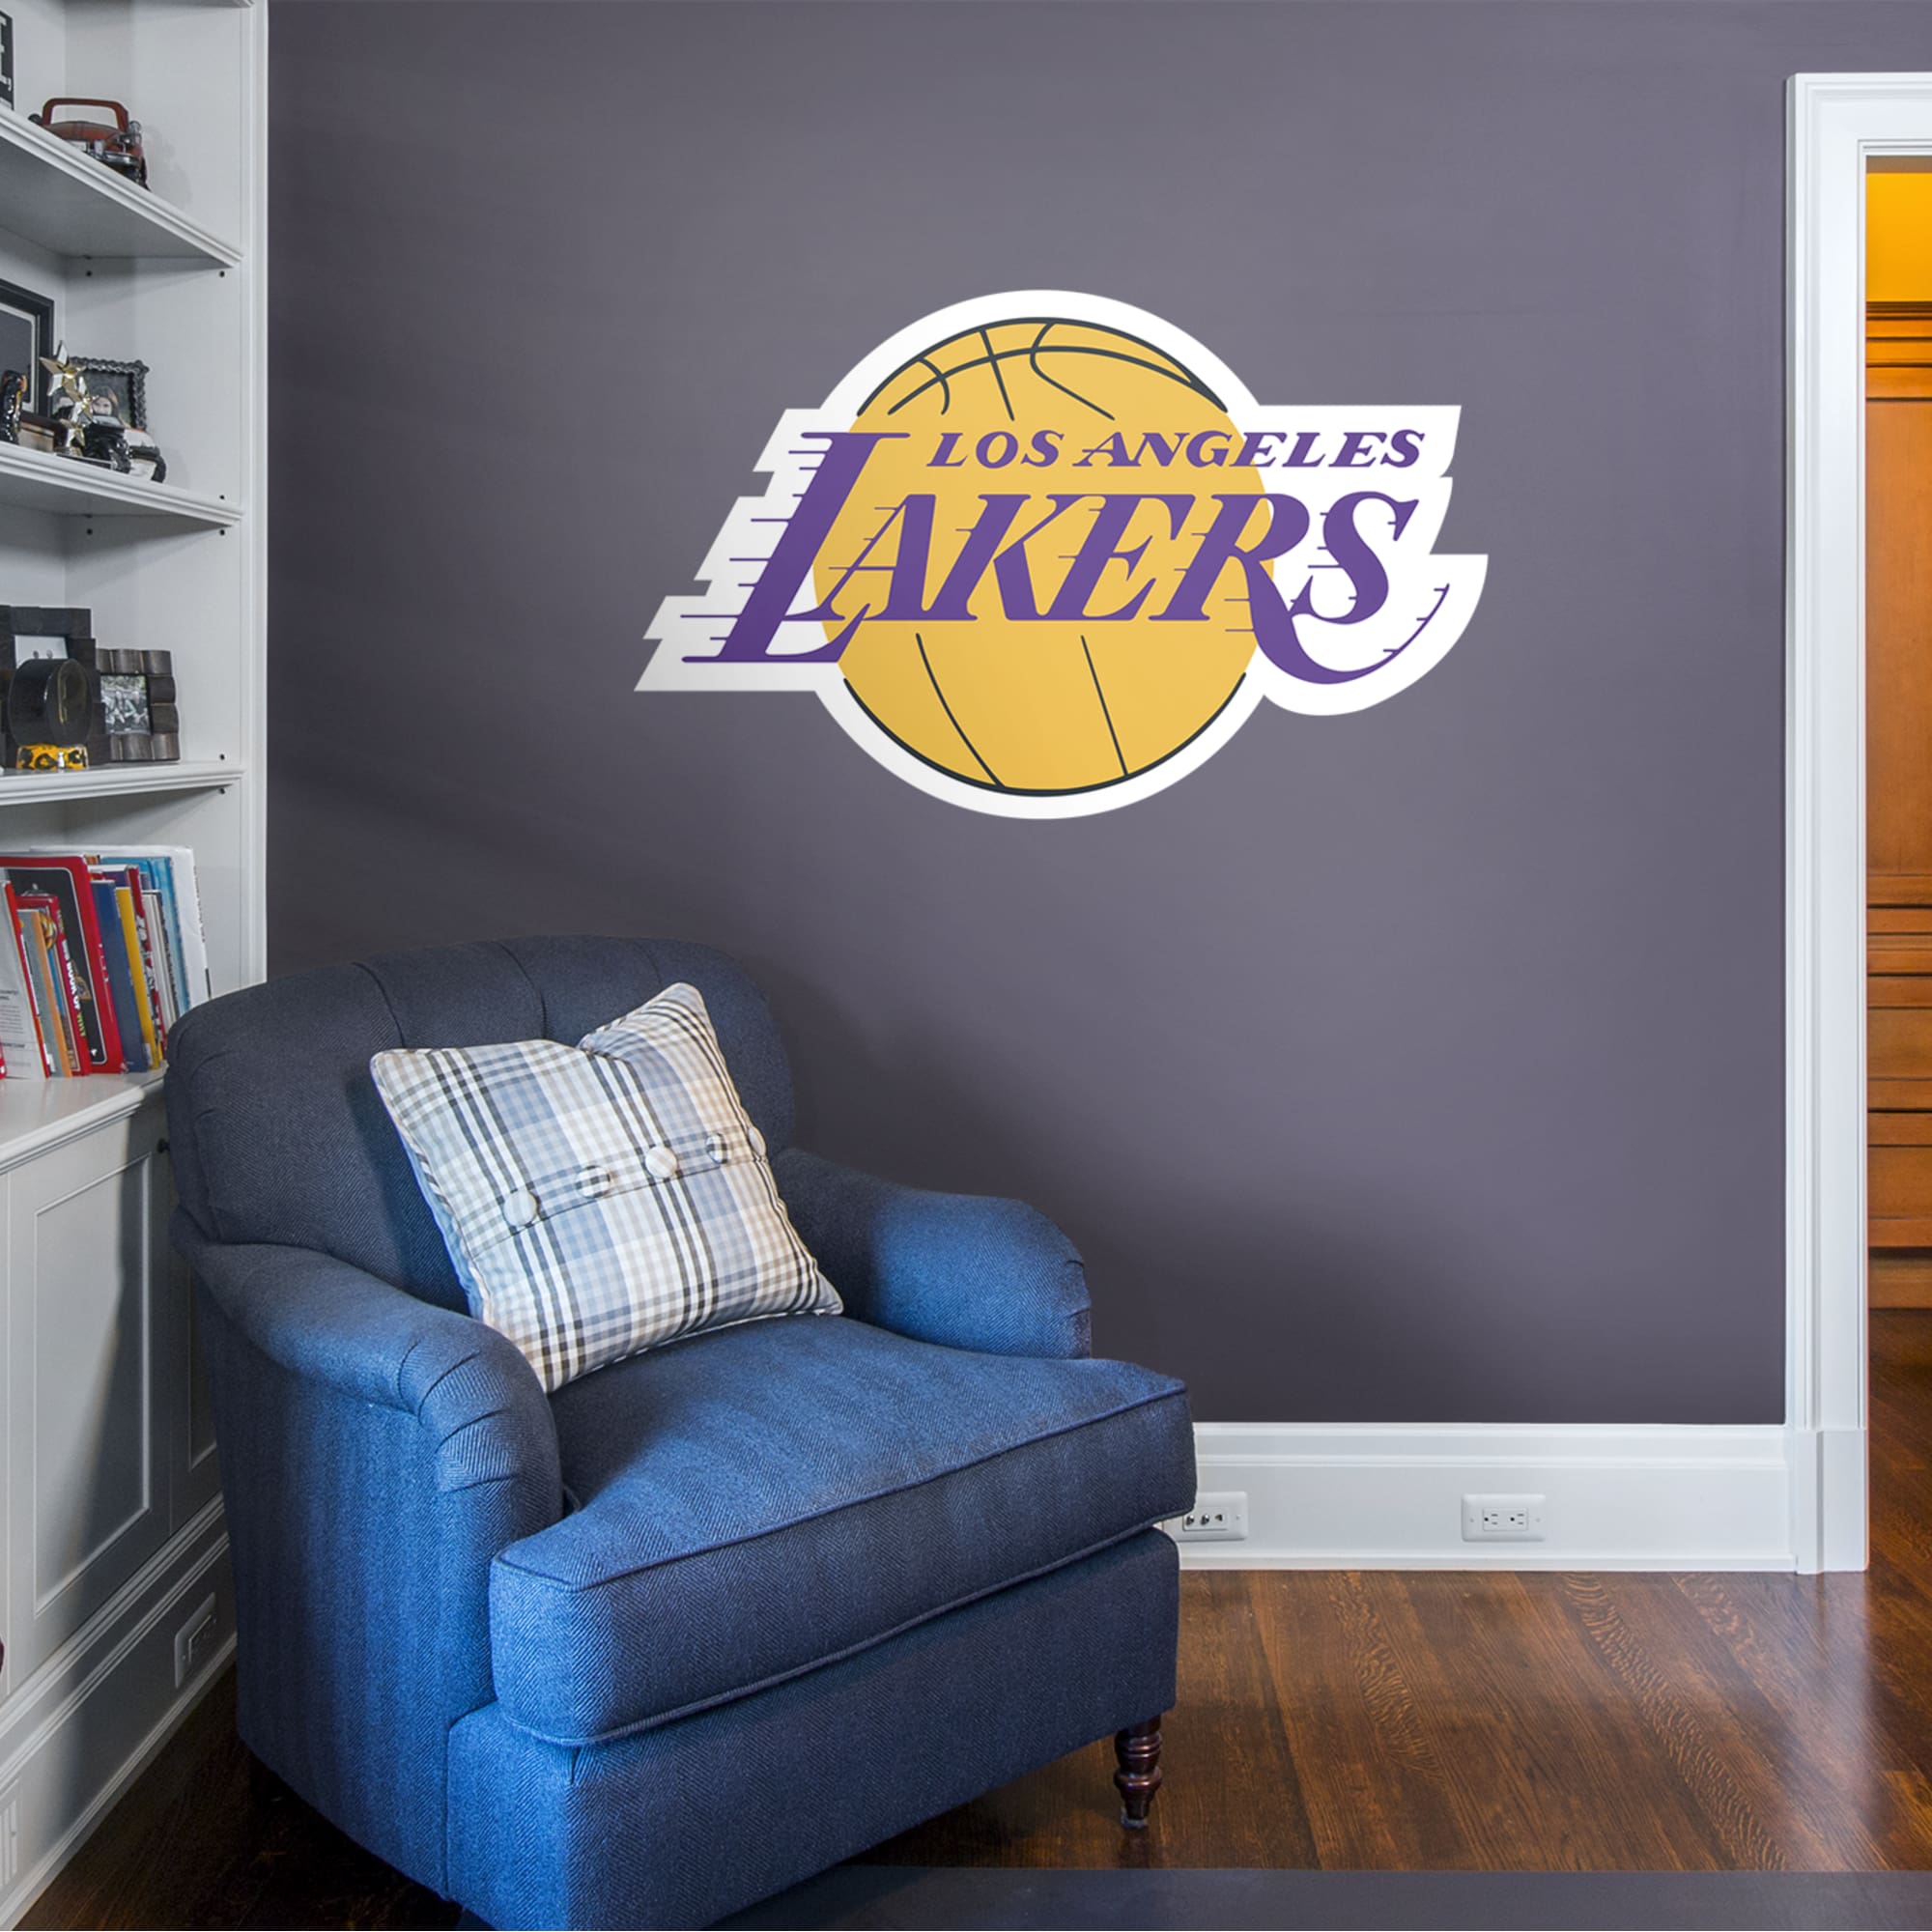 Los Angeles Lakers: Logo - Officially Licensed NBA Removable Wall Decal Giant Logo (50"W x 31"H) by Fathead | Vinyl